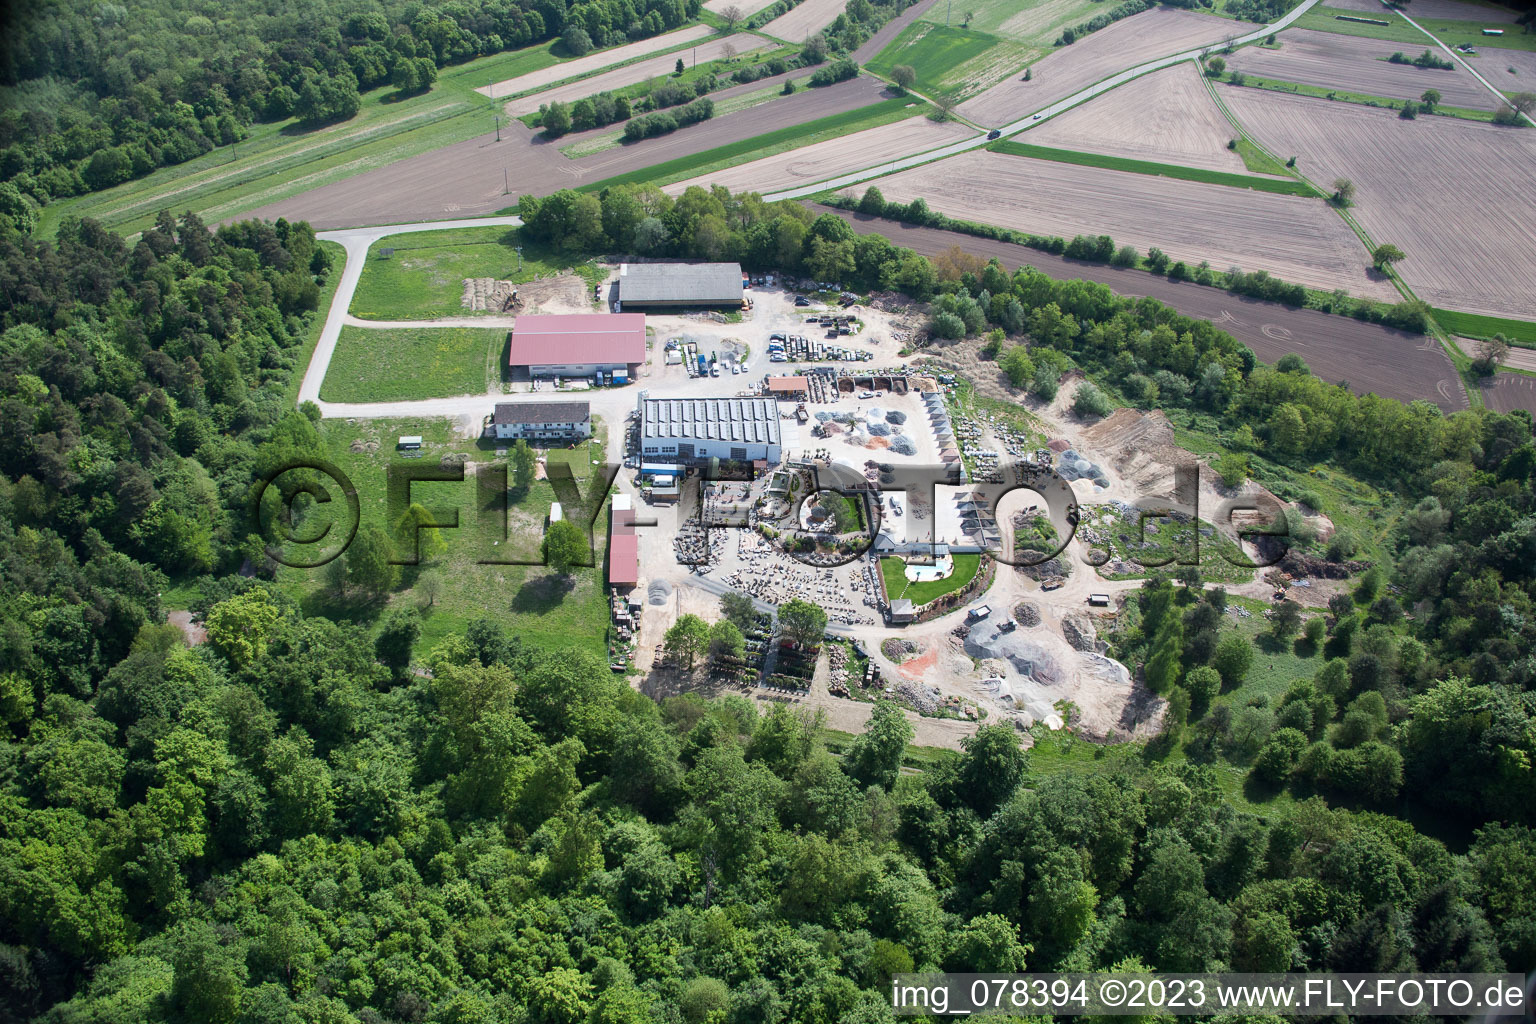 Palatinum landscape and garden design in Hagenbach in the state Rhineland-Palatinate, Germany from a drone